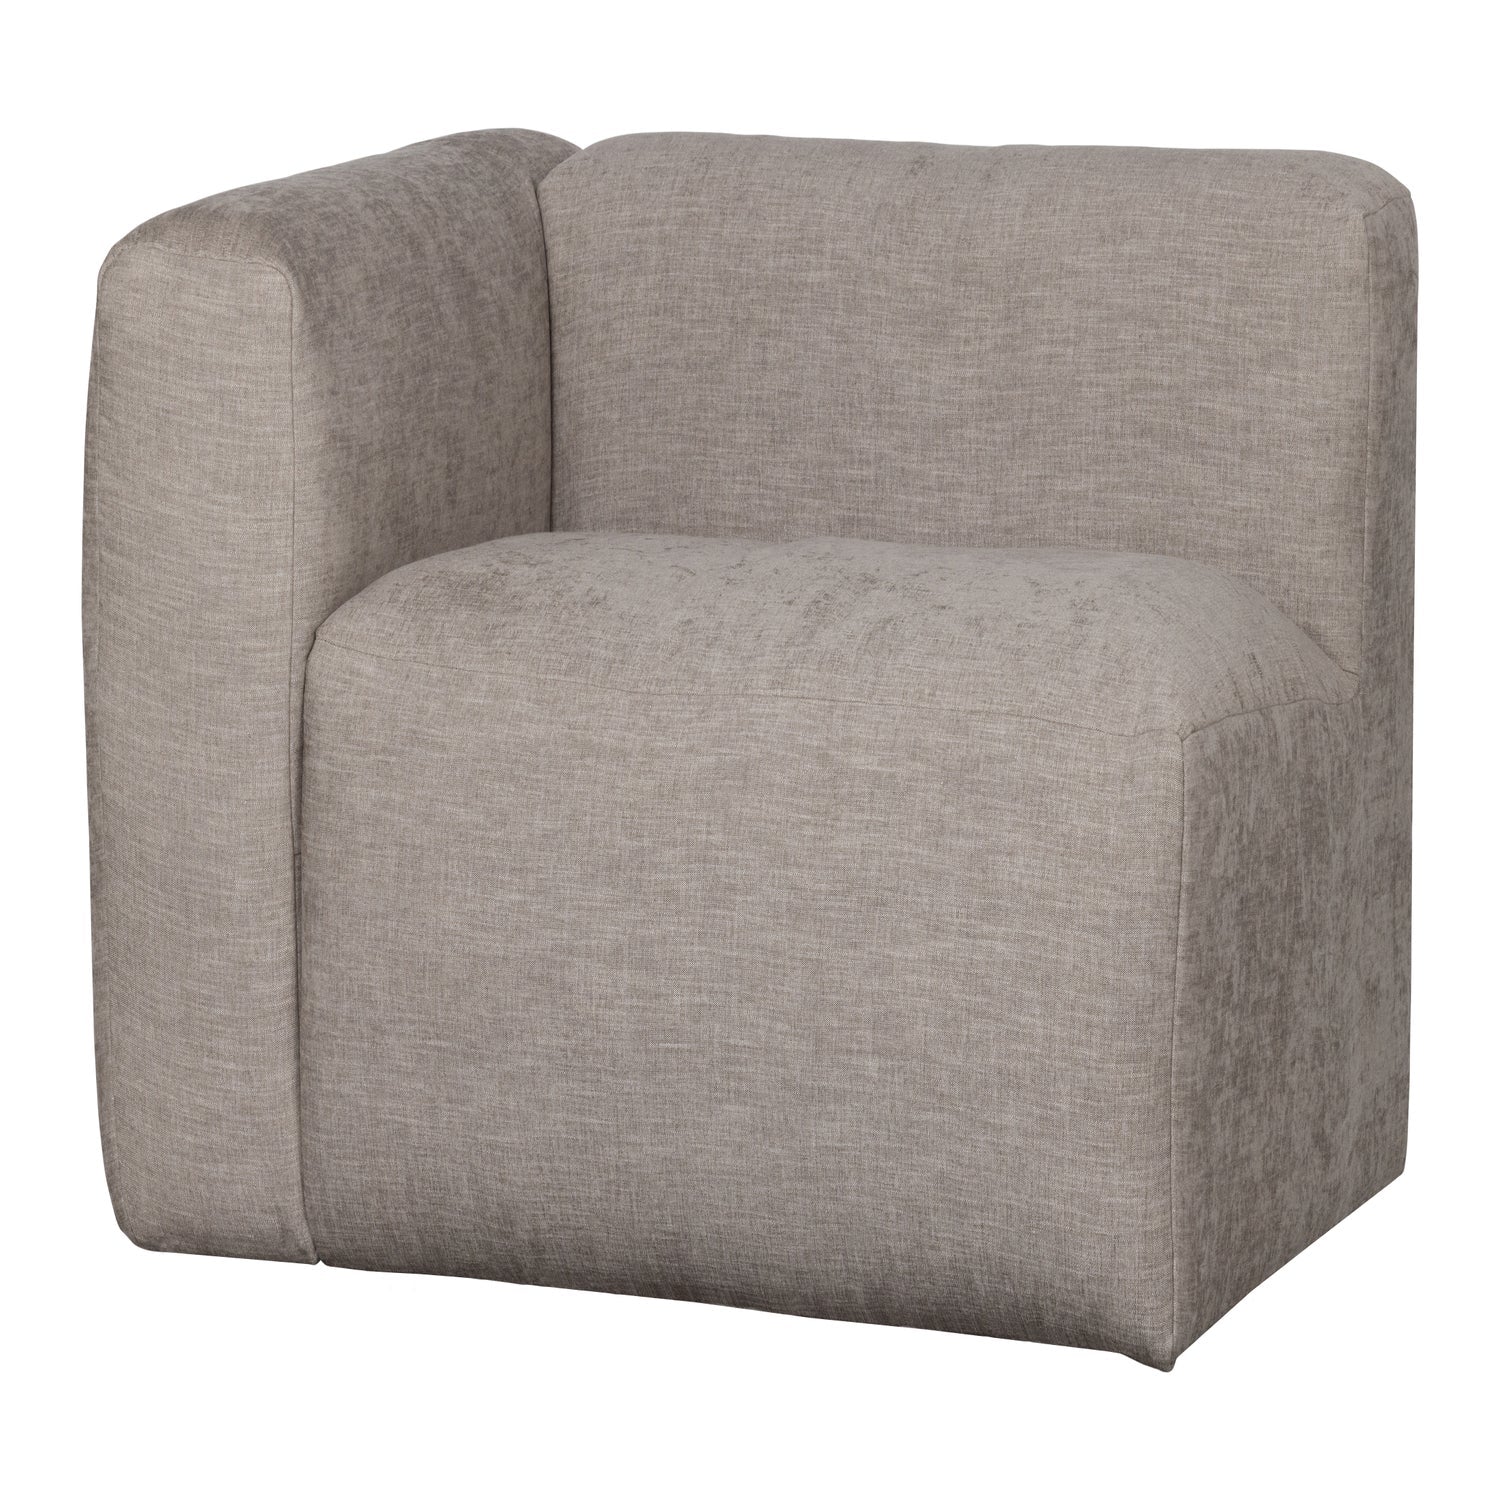 YENT 1-SEAT ELEMENT ARM LEFT WOVEN FABRIC NATURAL